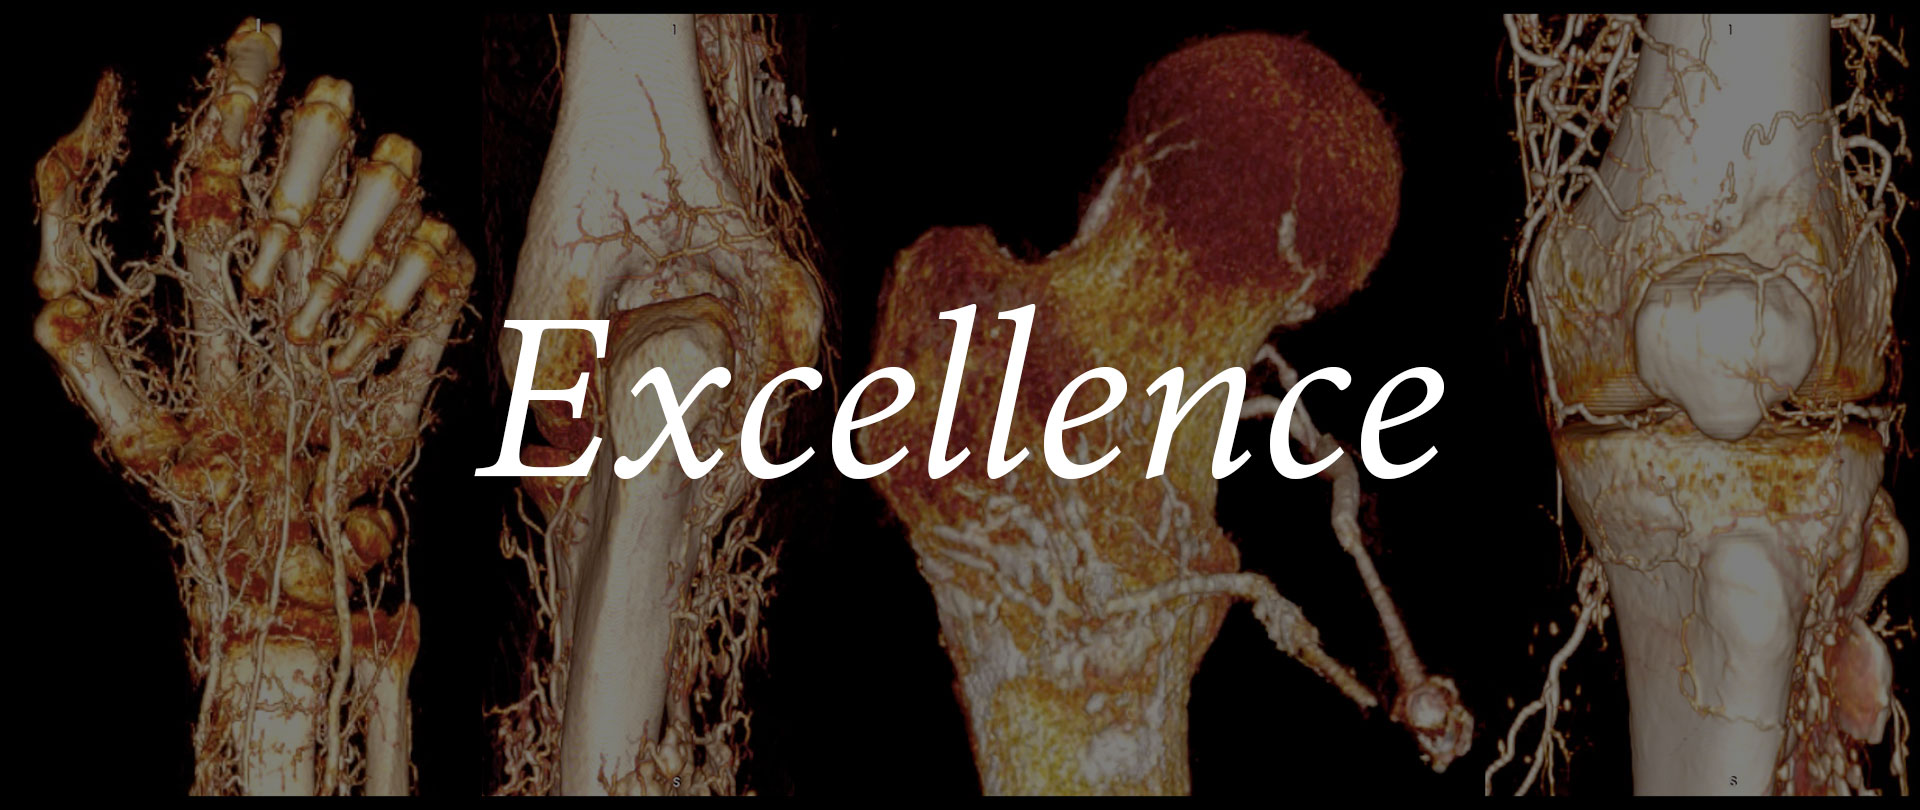 Excellence in patient care and research